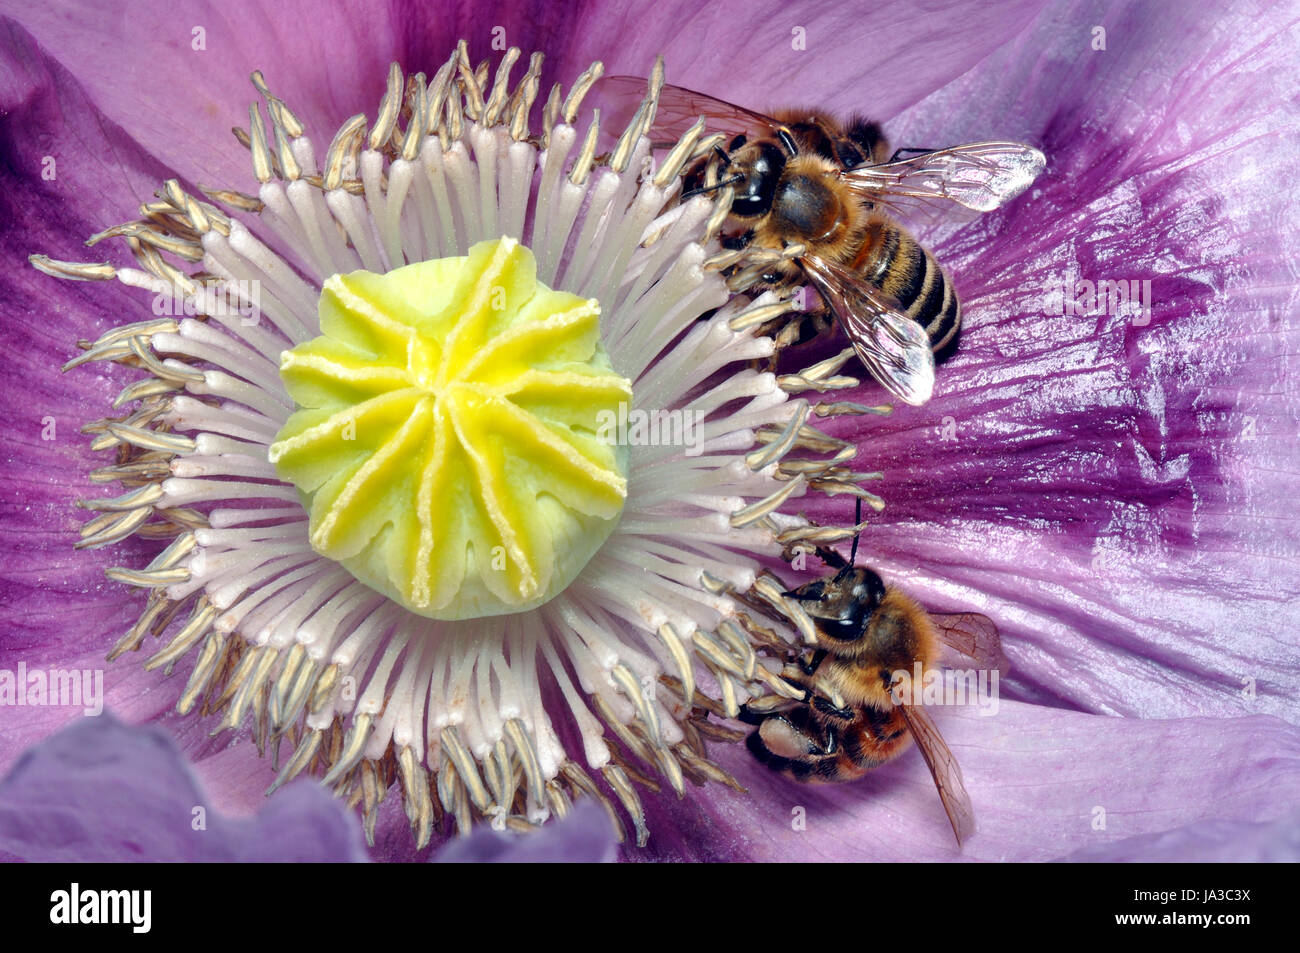 peony, insect, bee, peony, wing, pollen, antenna, stamens, fecundate, collect, Stock Photo